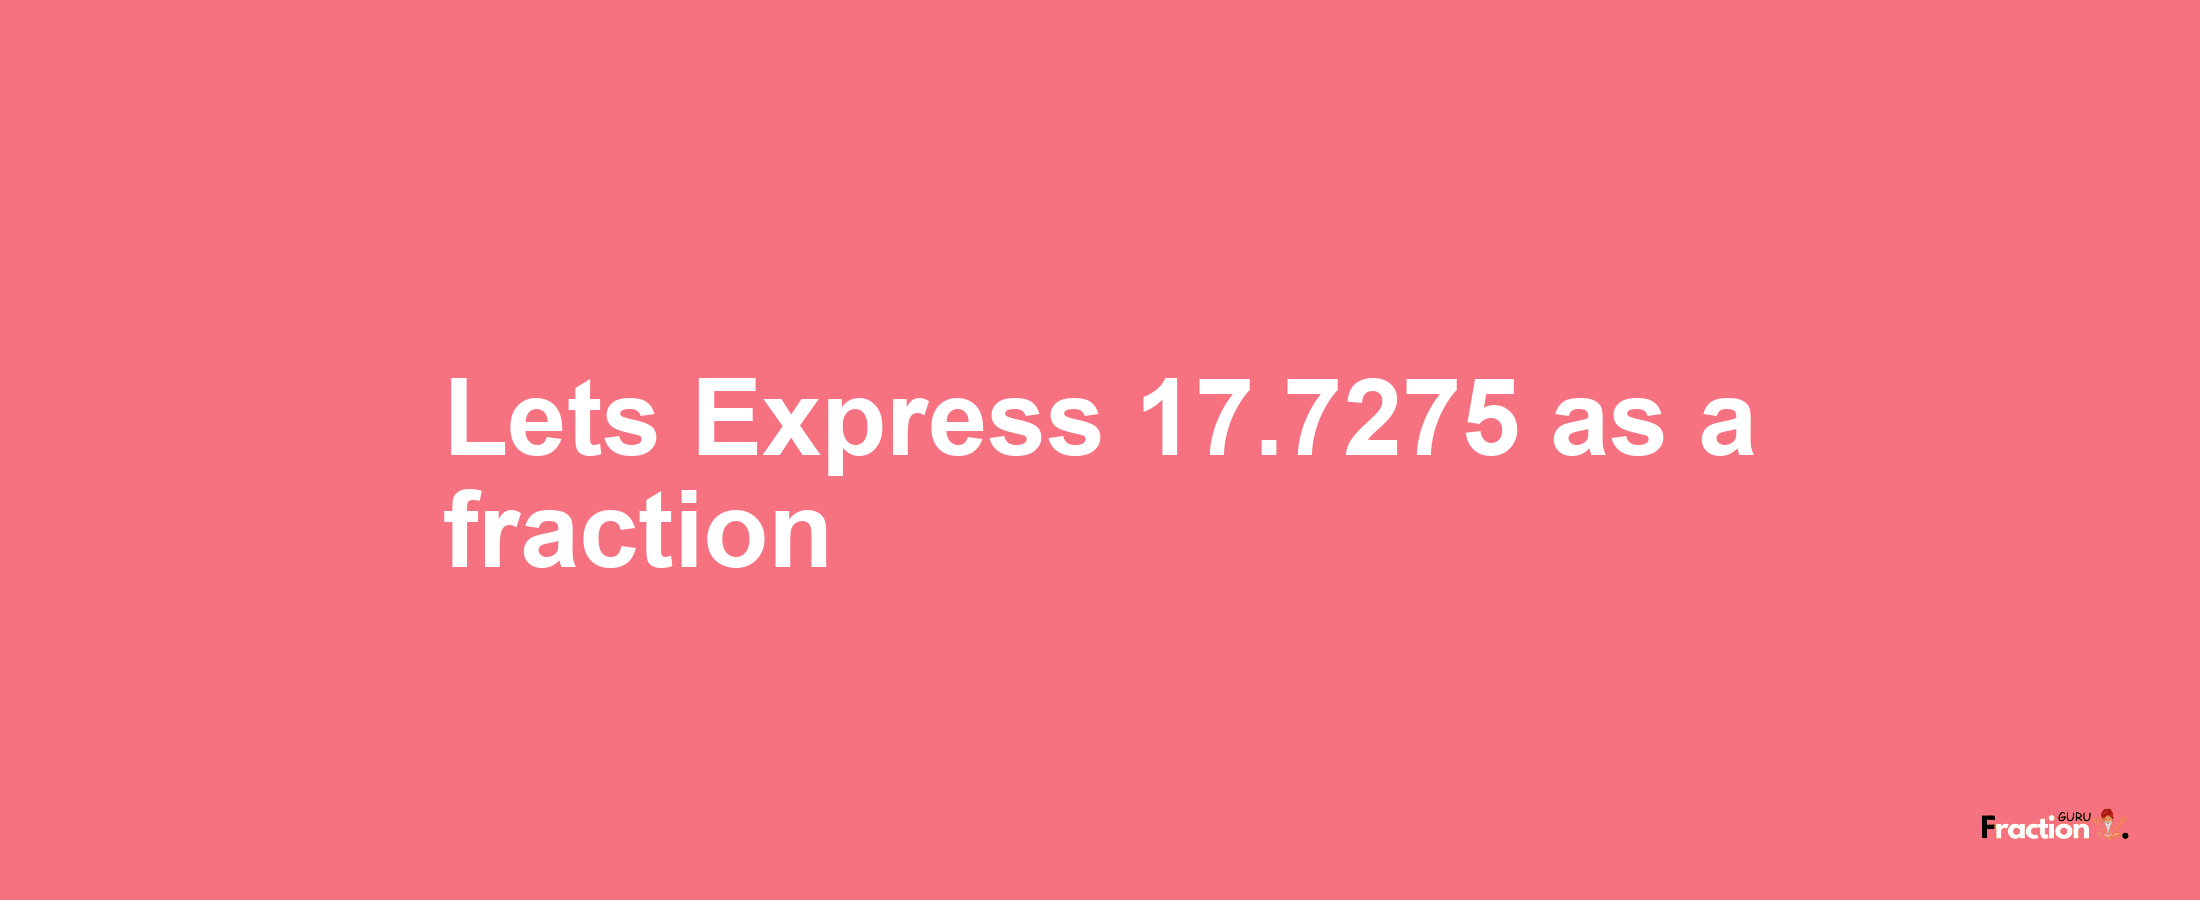 Lets Express 17.7275 as afraction